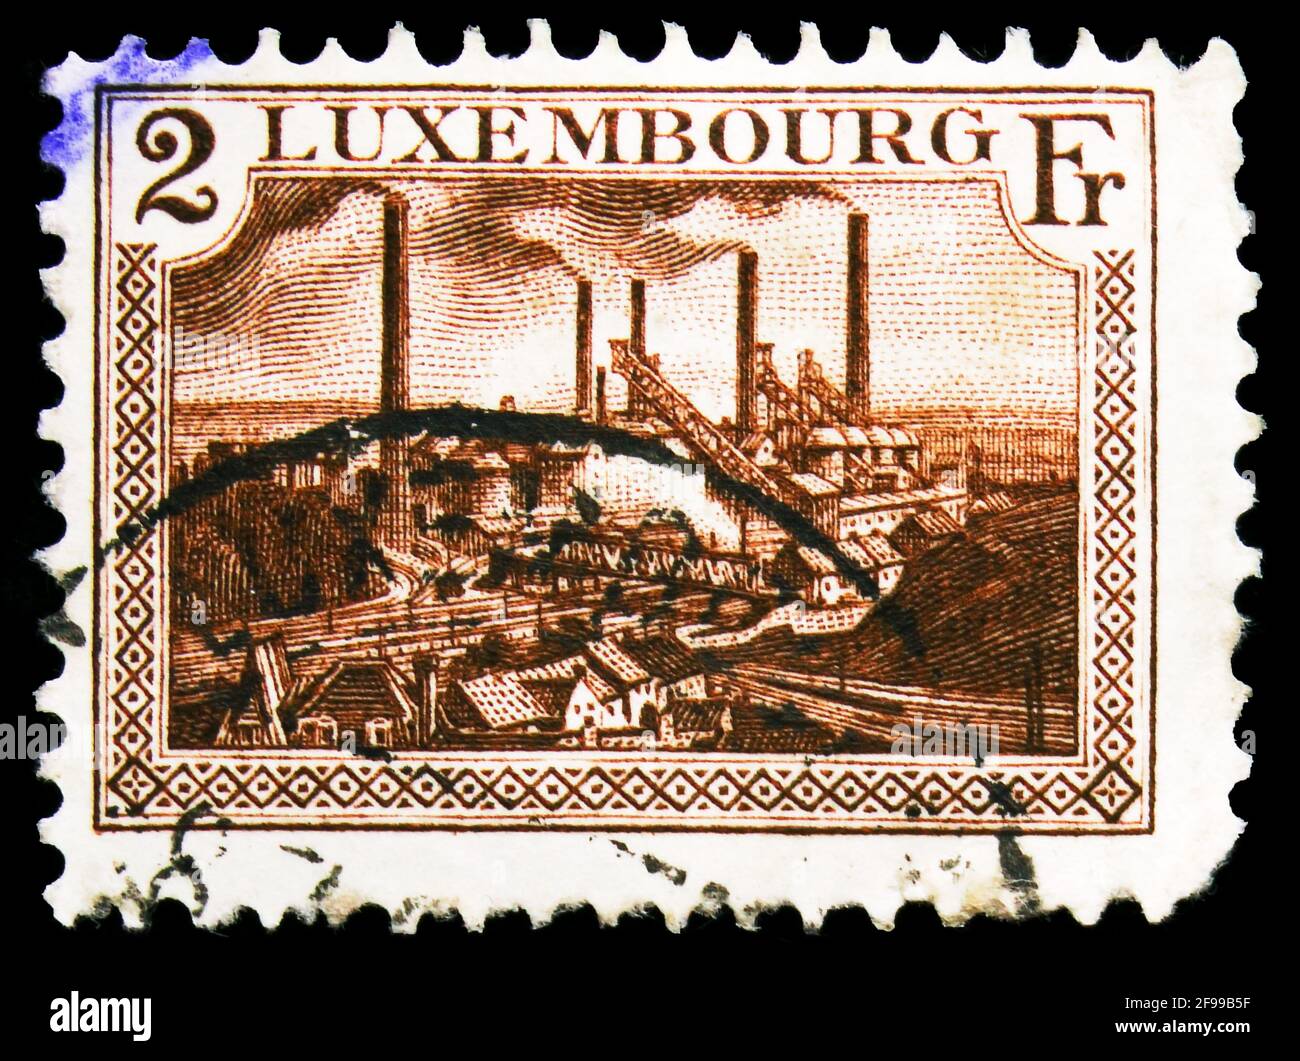 MOSCOW, RUSSIA - NOVEMBER 4, 2019: Postage stamp printed in Luxembourg shows Esch-sur-Alzette Foundries, Arms, Grand Duchess Charlotte and Landscapes Stock Photo